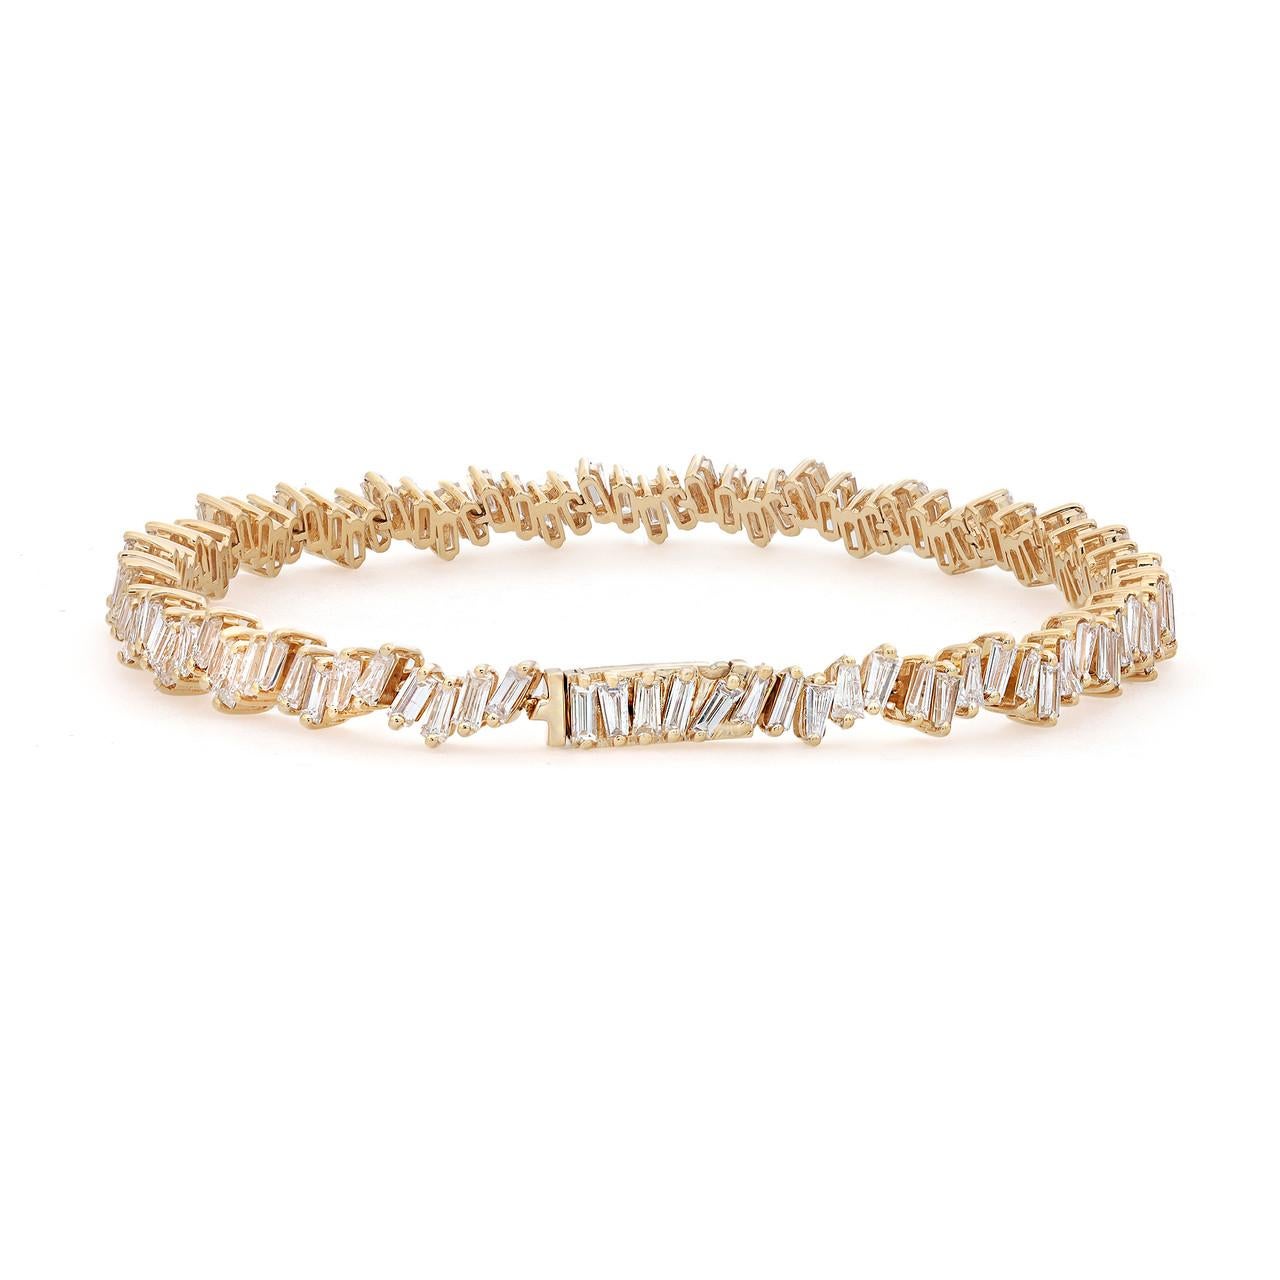 Step into the world of ultimate craftsmanship with the captivating 4.48 Carat Baguette Cut Diamond Tennis Bracelet in 18K Yellow Gold. This bracelet is a true symbol of luxury and beauty. It features a stunning array of carefully chosen baguette cut